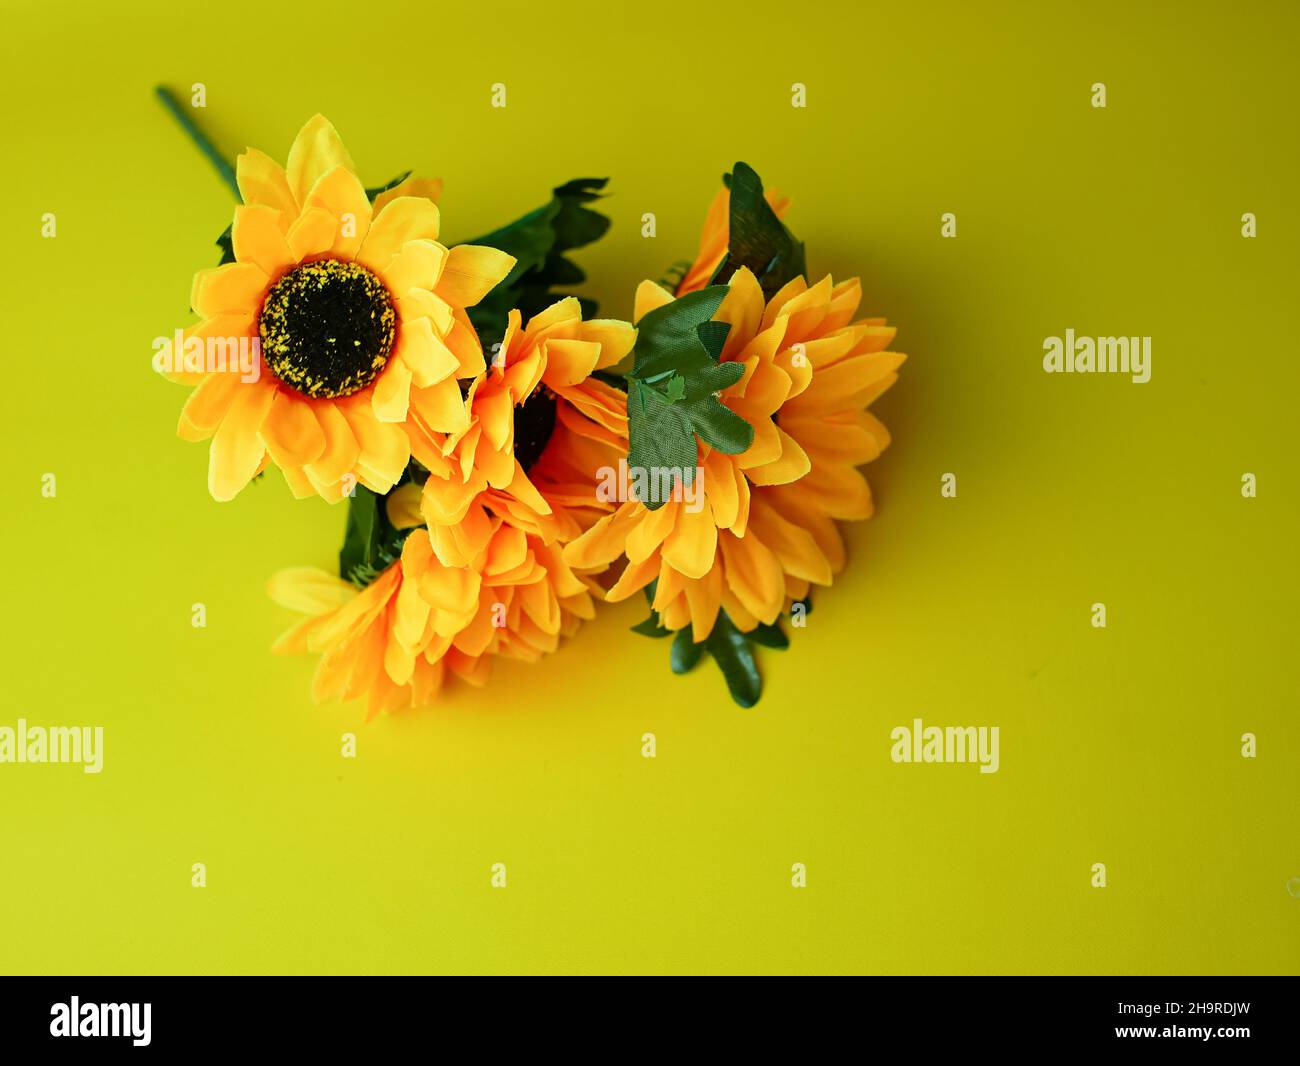 artificial sunflower for decoration isolated on yellow background Stock Photo